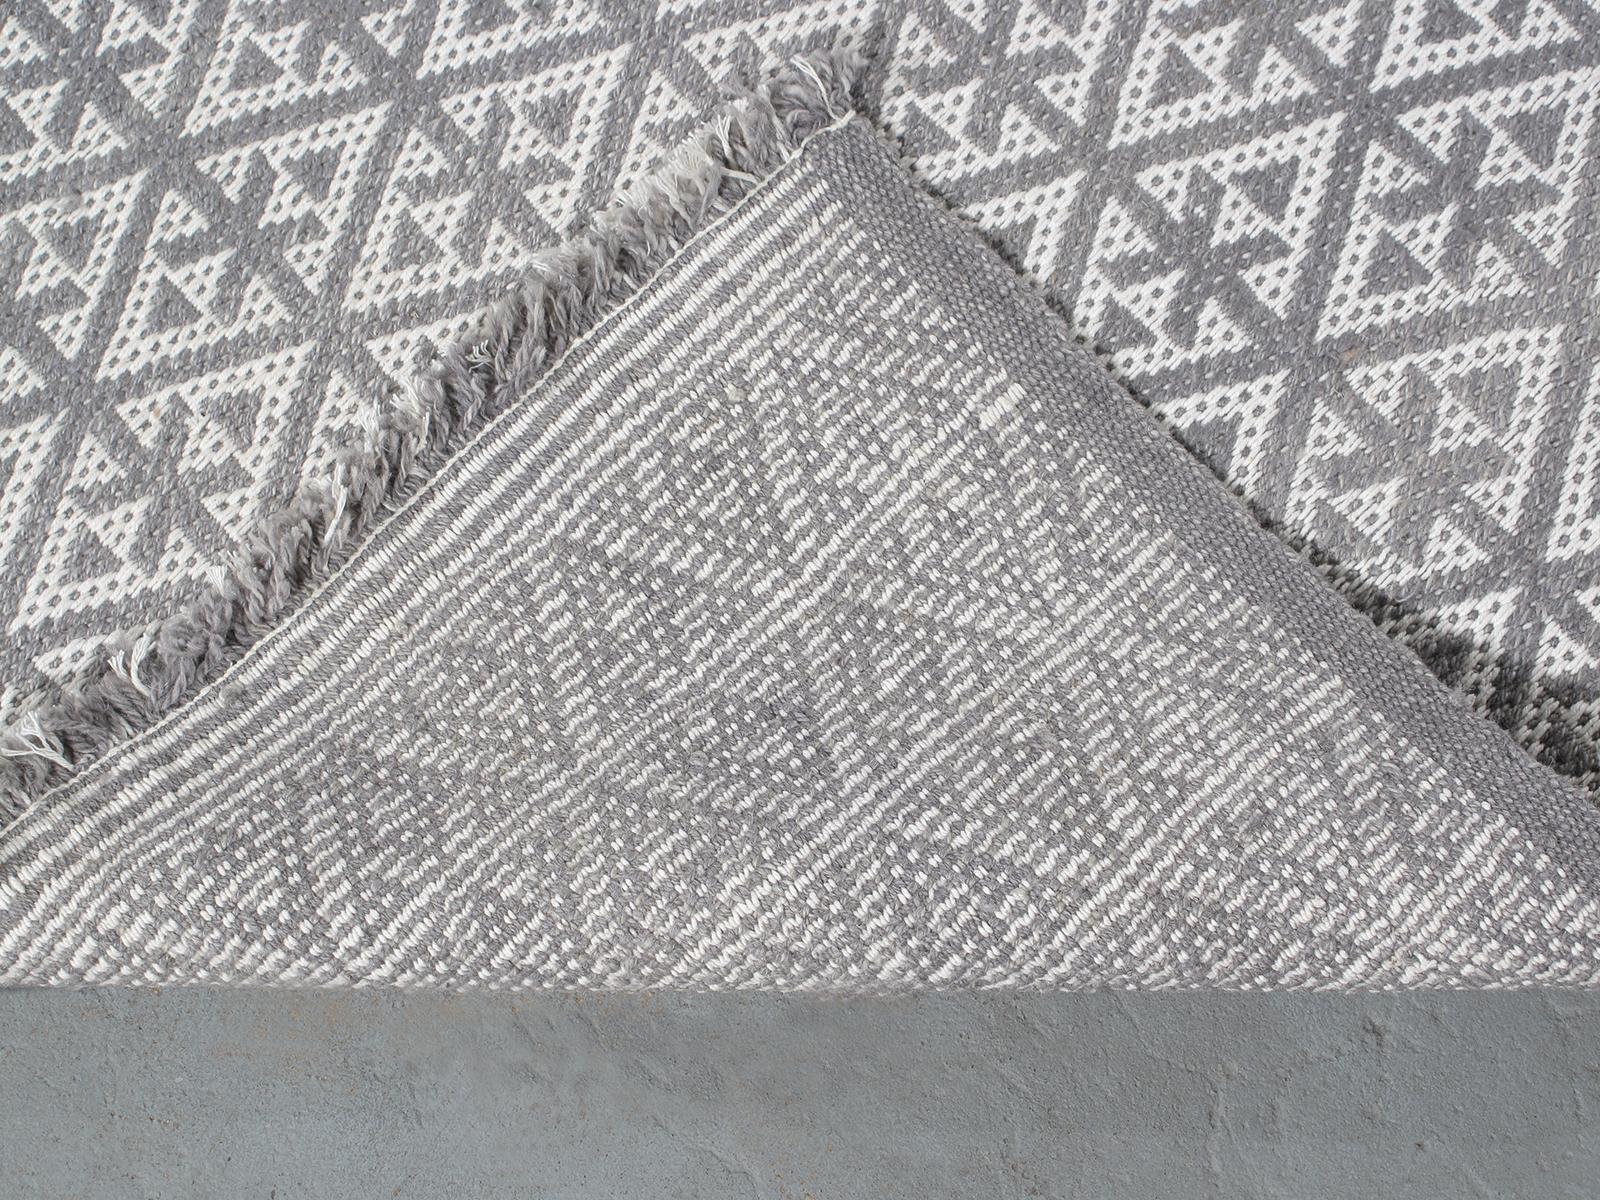 Decorative Handwoven Flat-Weave Runner Rug in Grey and Ivory Color In New Condition For Sale In New York, NY